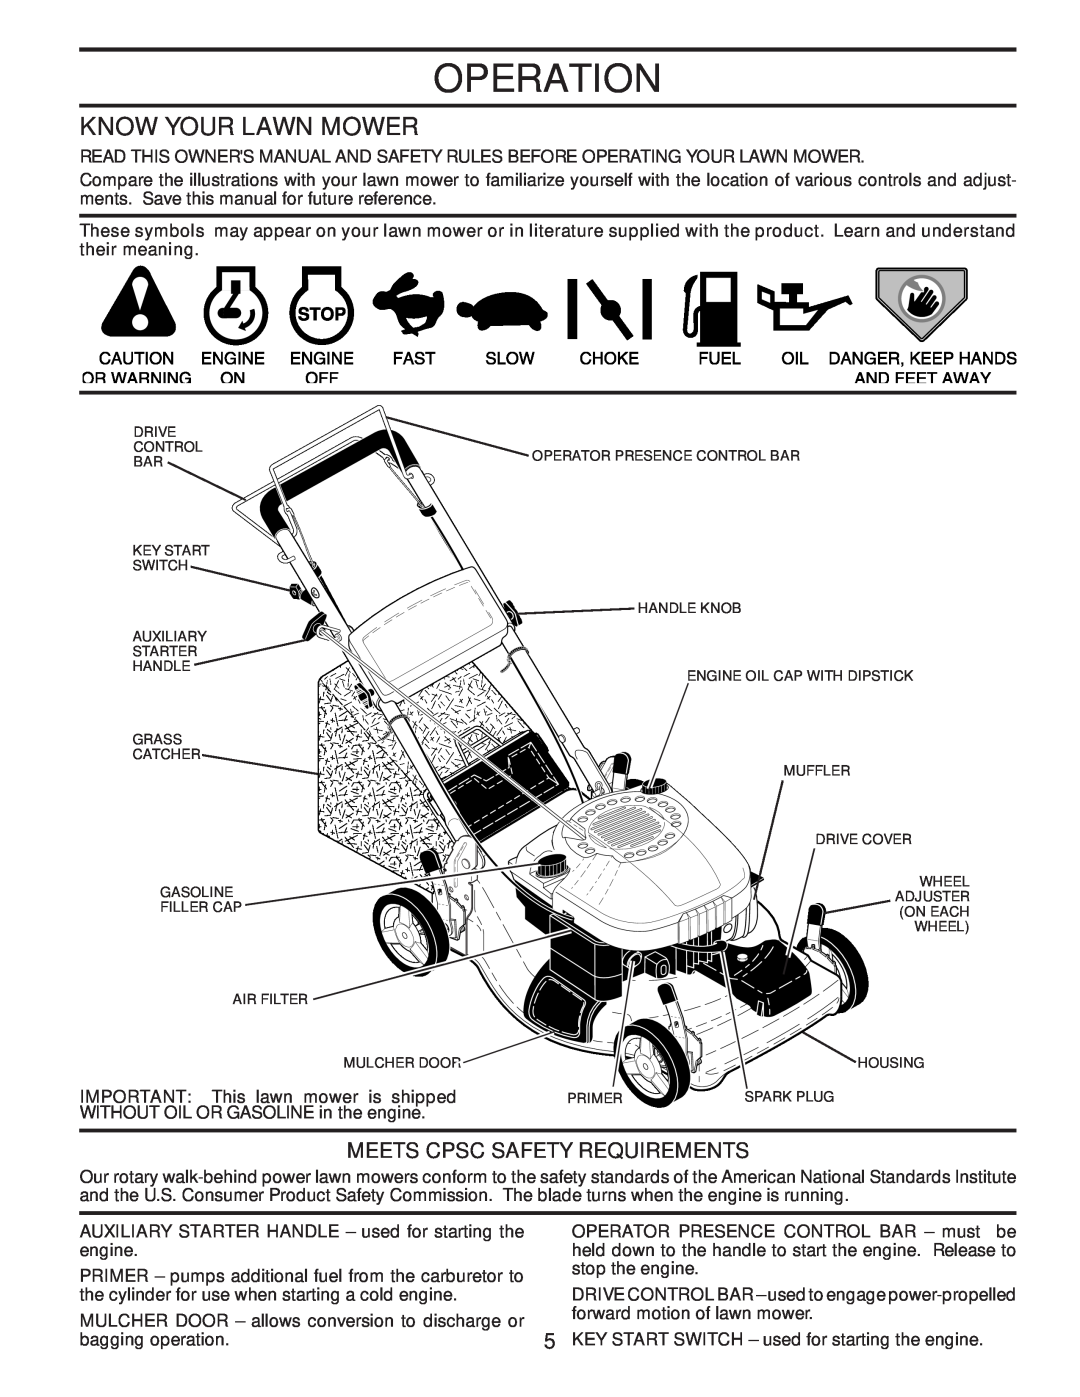 Husqvarna 532424695, 62522FE, 96143004400 owner manual Operation, Know Your Lawn Mower, Meets Cpsc Safety Requirements 